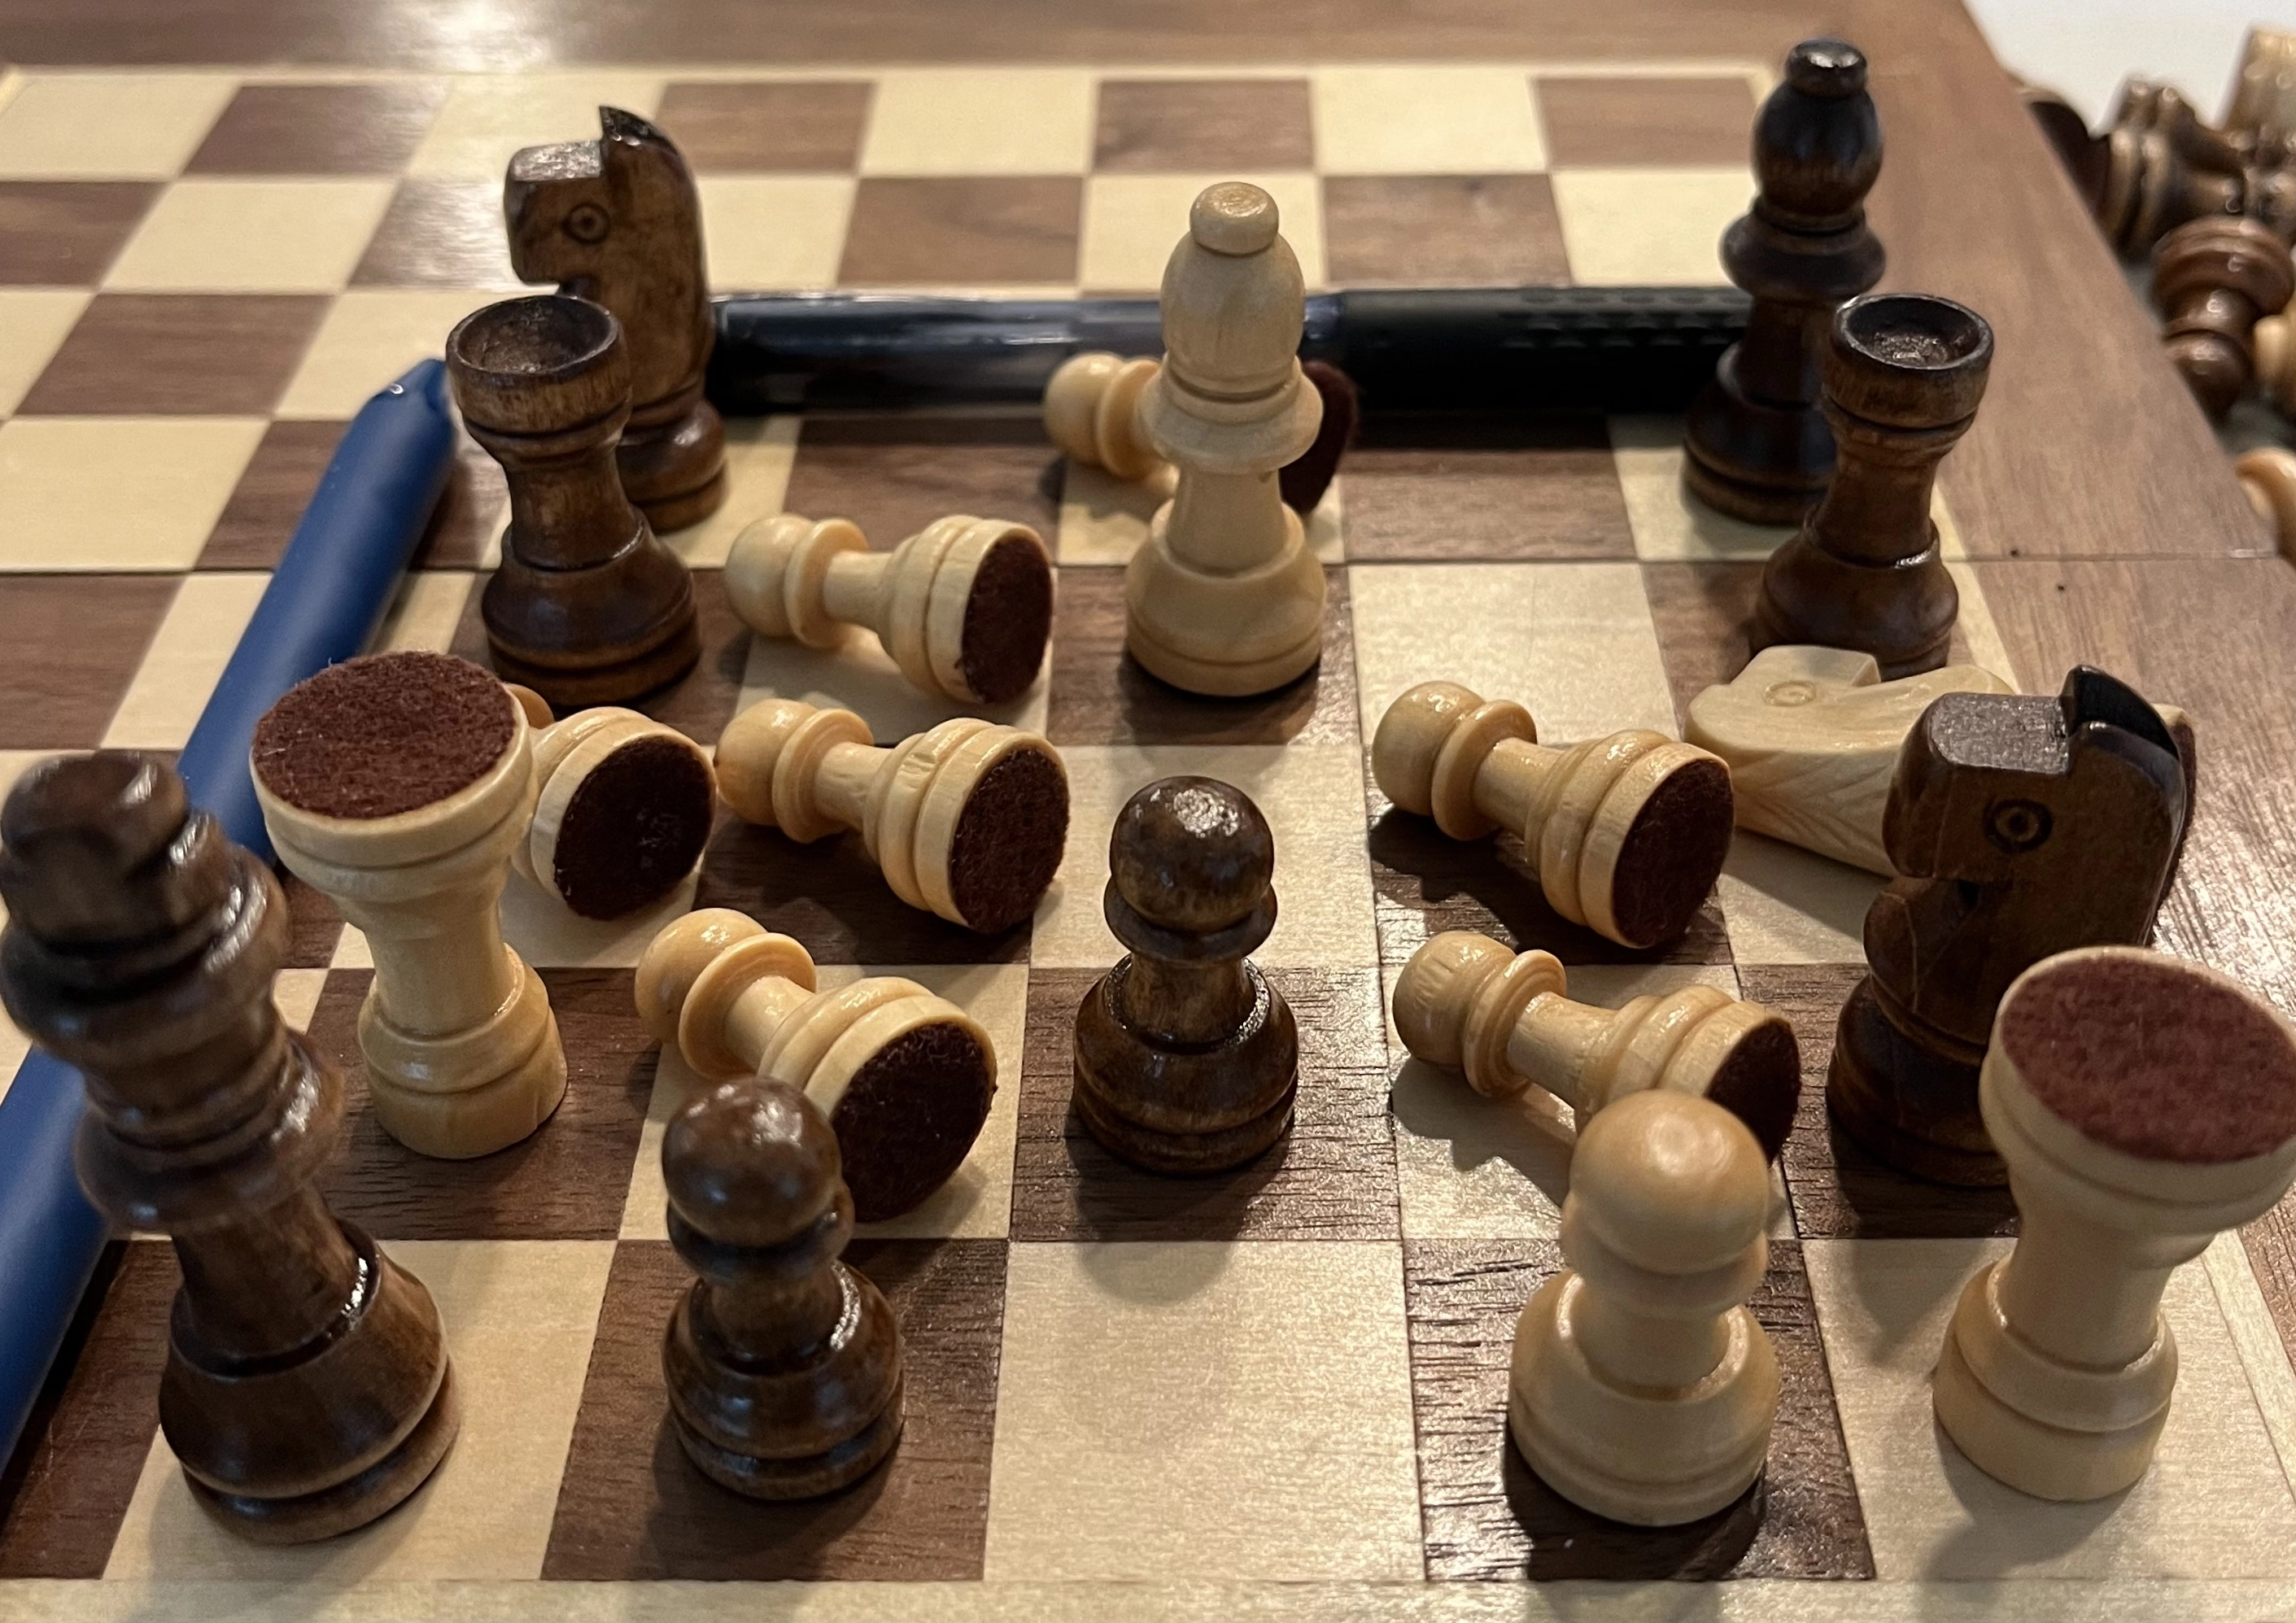 FPS Chess for Free ♟️ Download FPS Chess Game to Play on Windows 10 PC or  Online